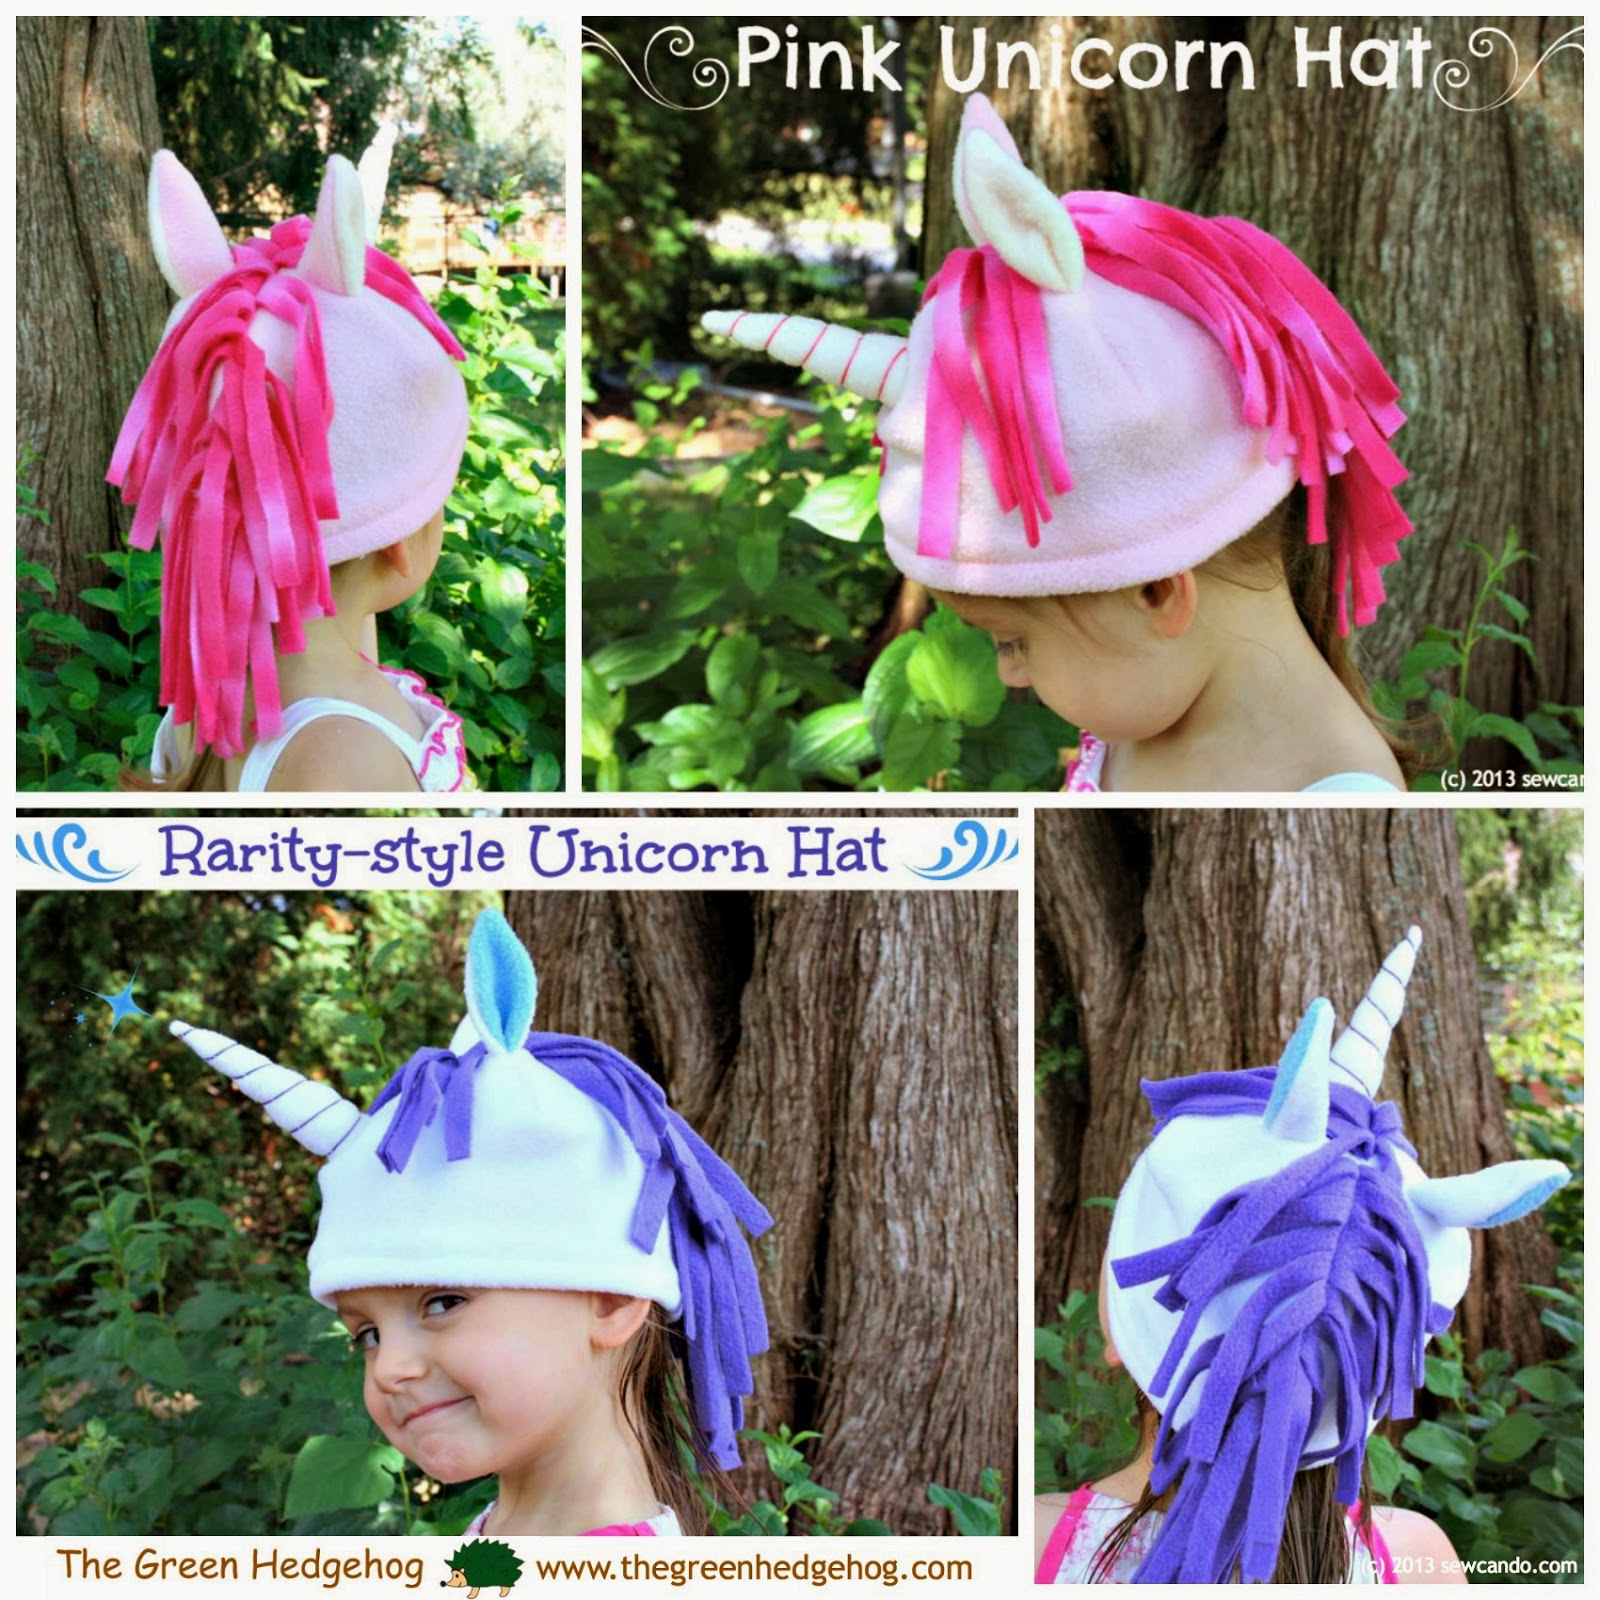 Sew Can Do: My Little Pony Unicorn Hats & A Return To Hat Making